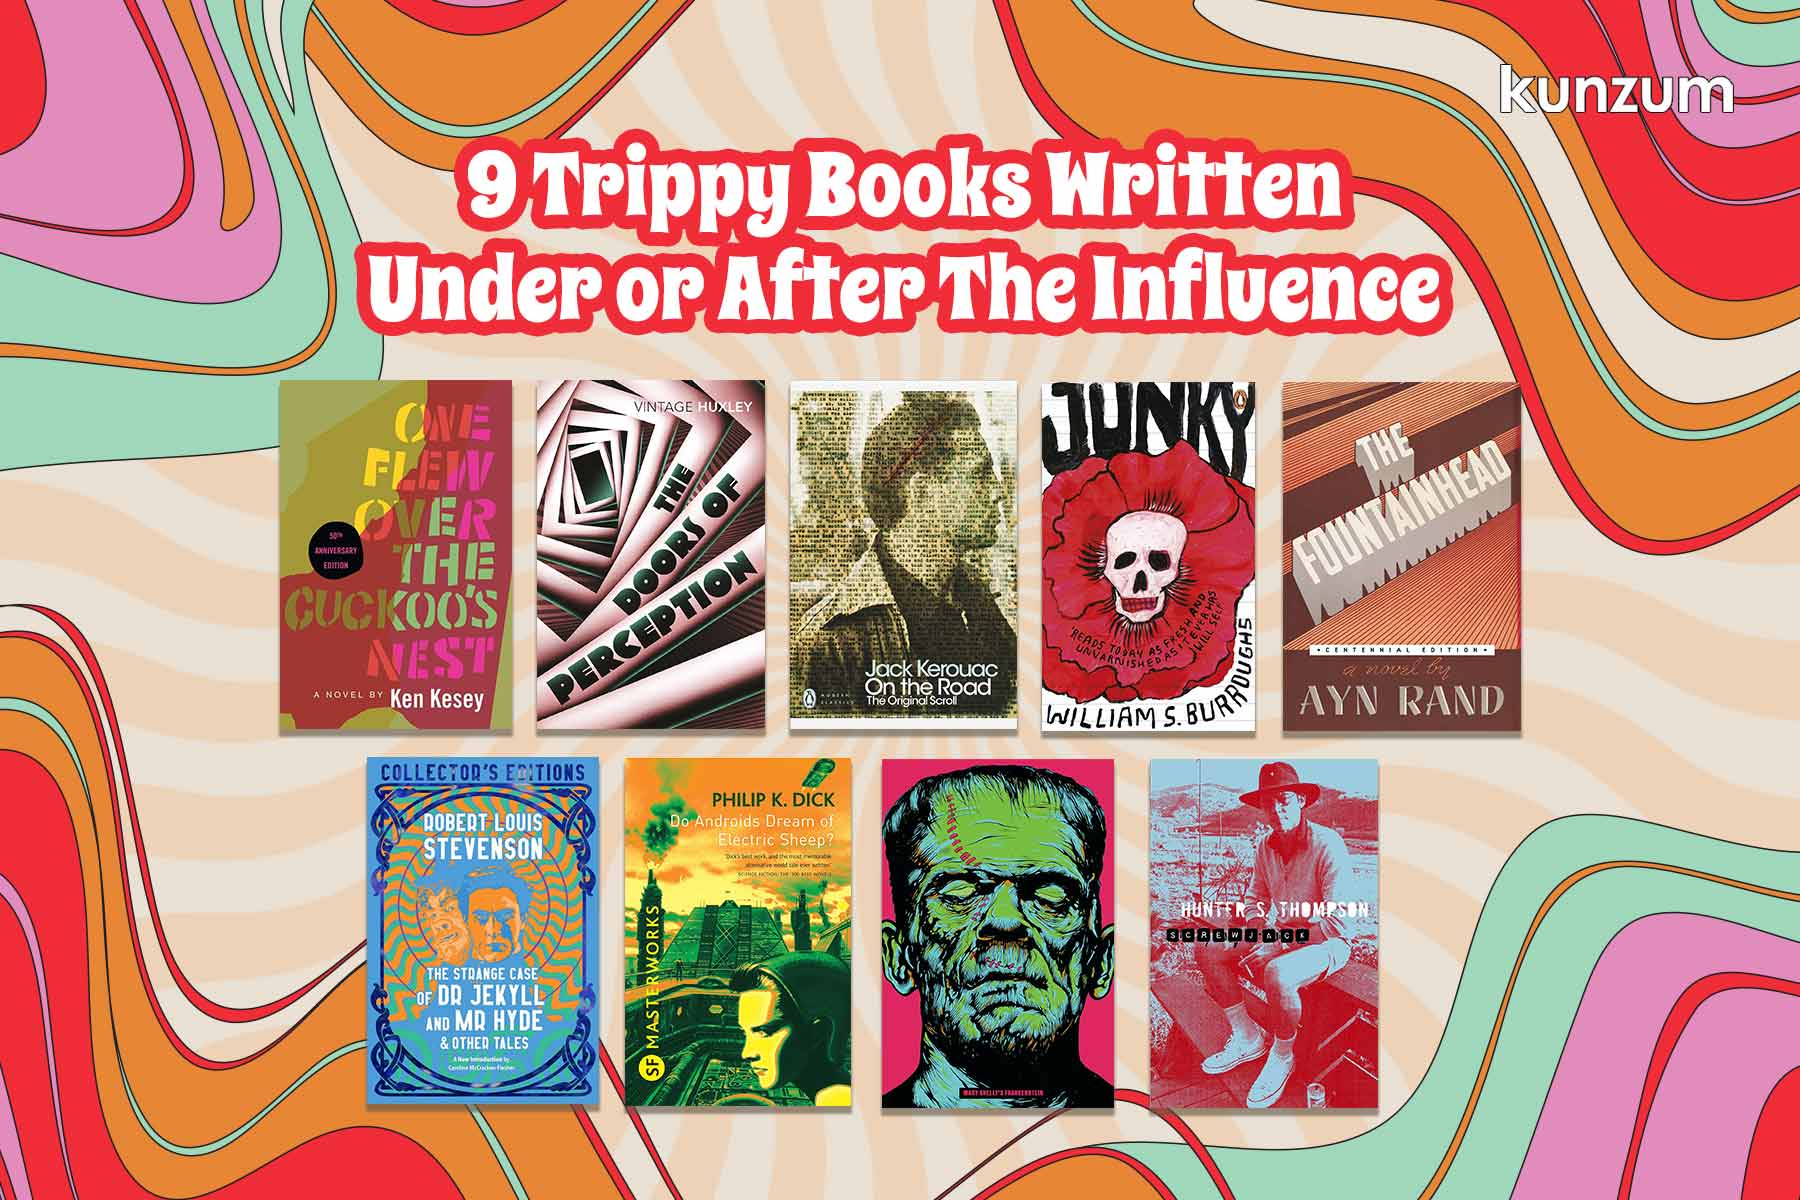 9 Trippy Books Written Under or After The Influence